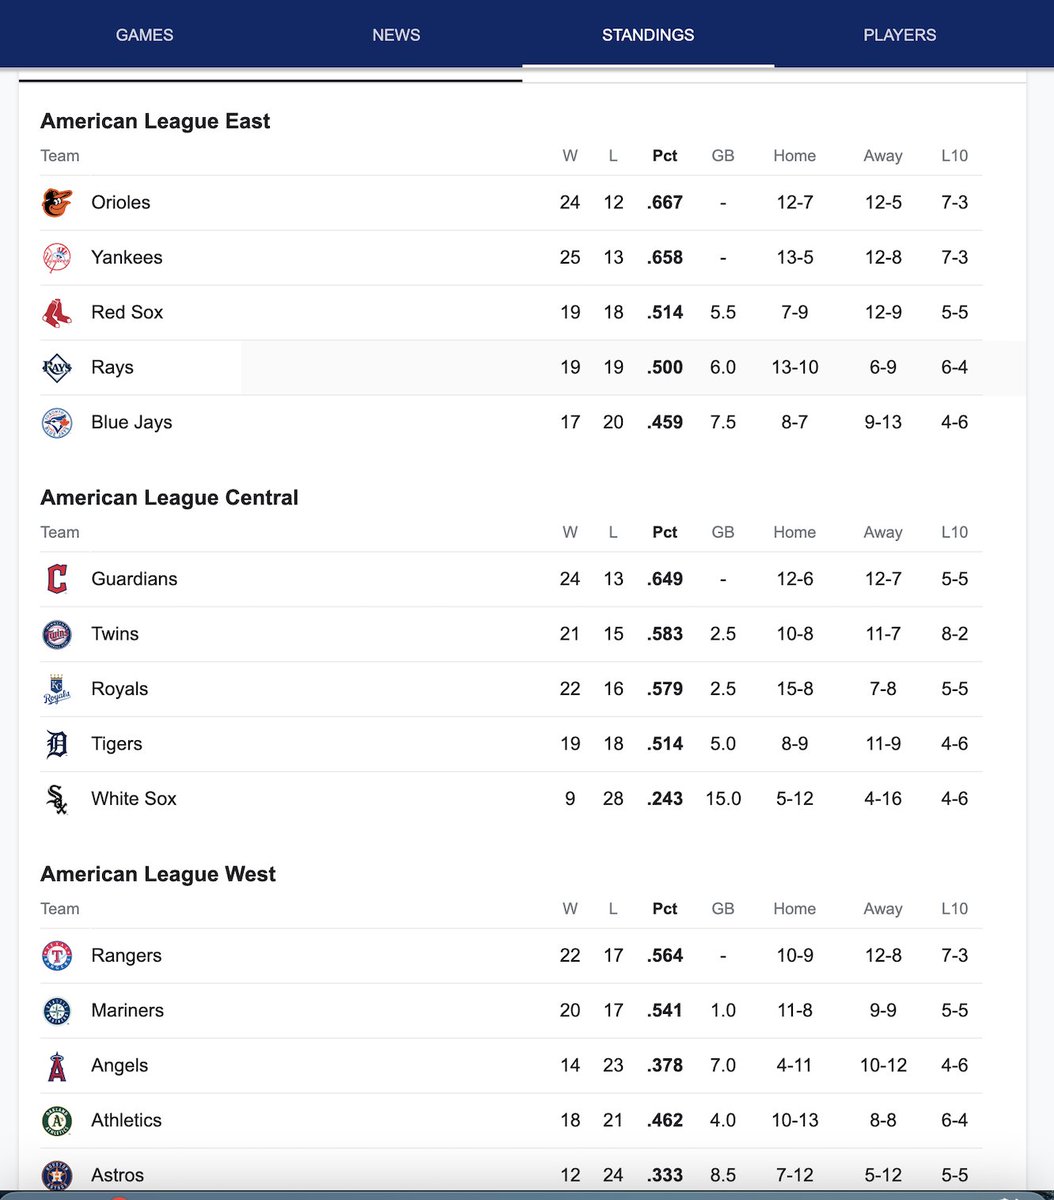 MLB.com standings this morning. Somehow the @Angels are listed ahead of the @Athletics in the #ALWest despite having more losses & fewer wins. The A's truly don't get any respect.